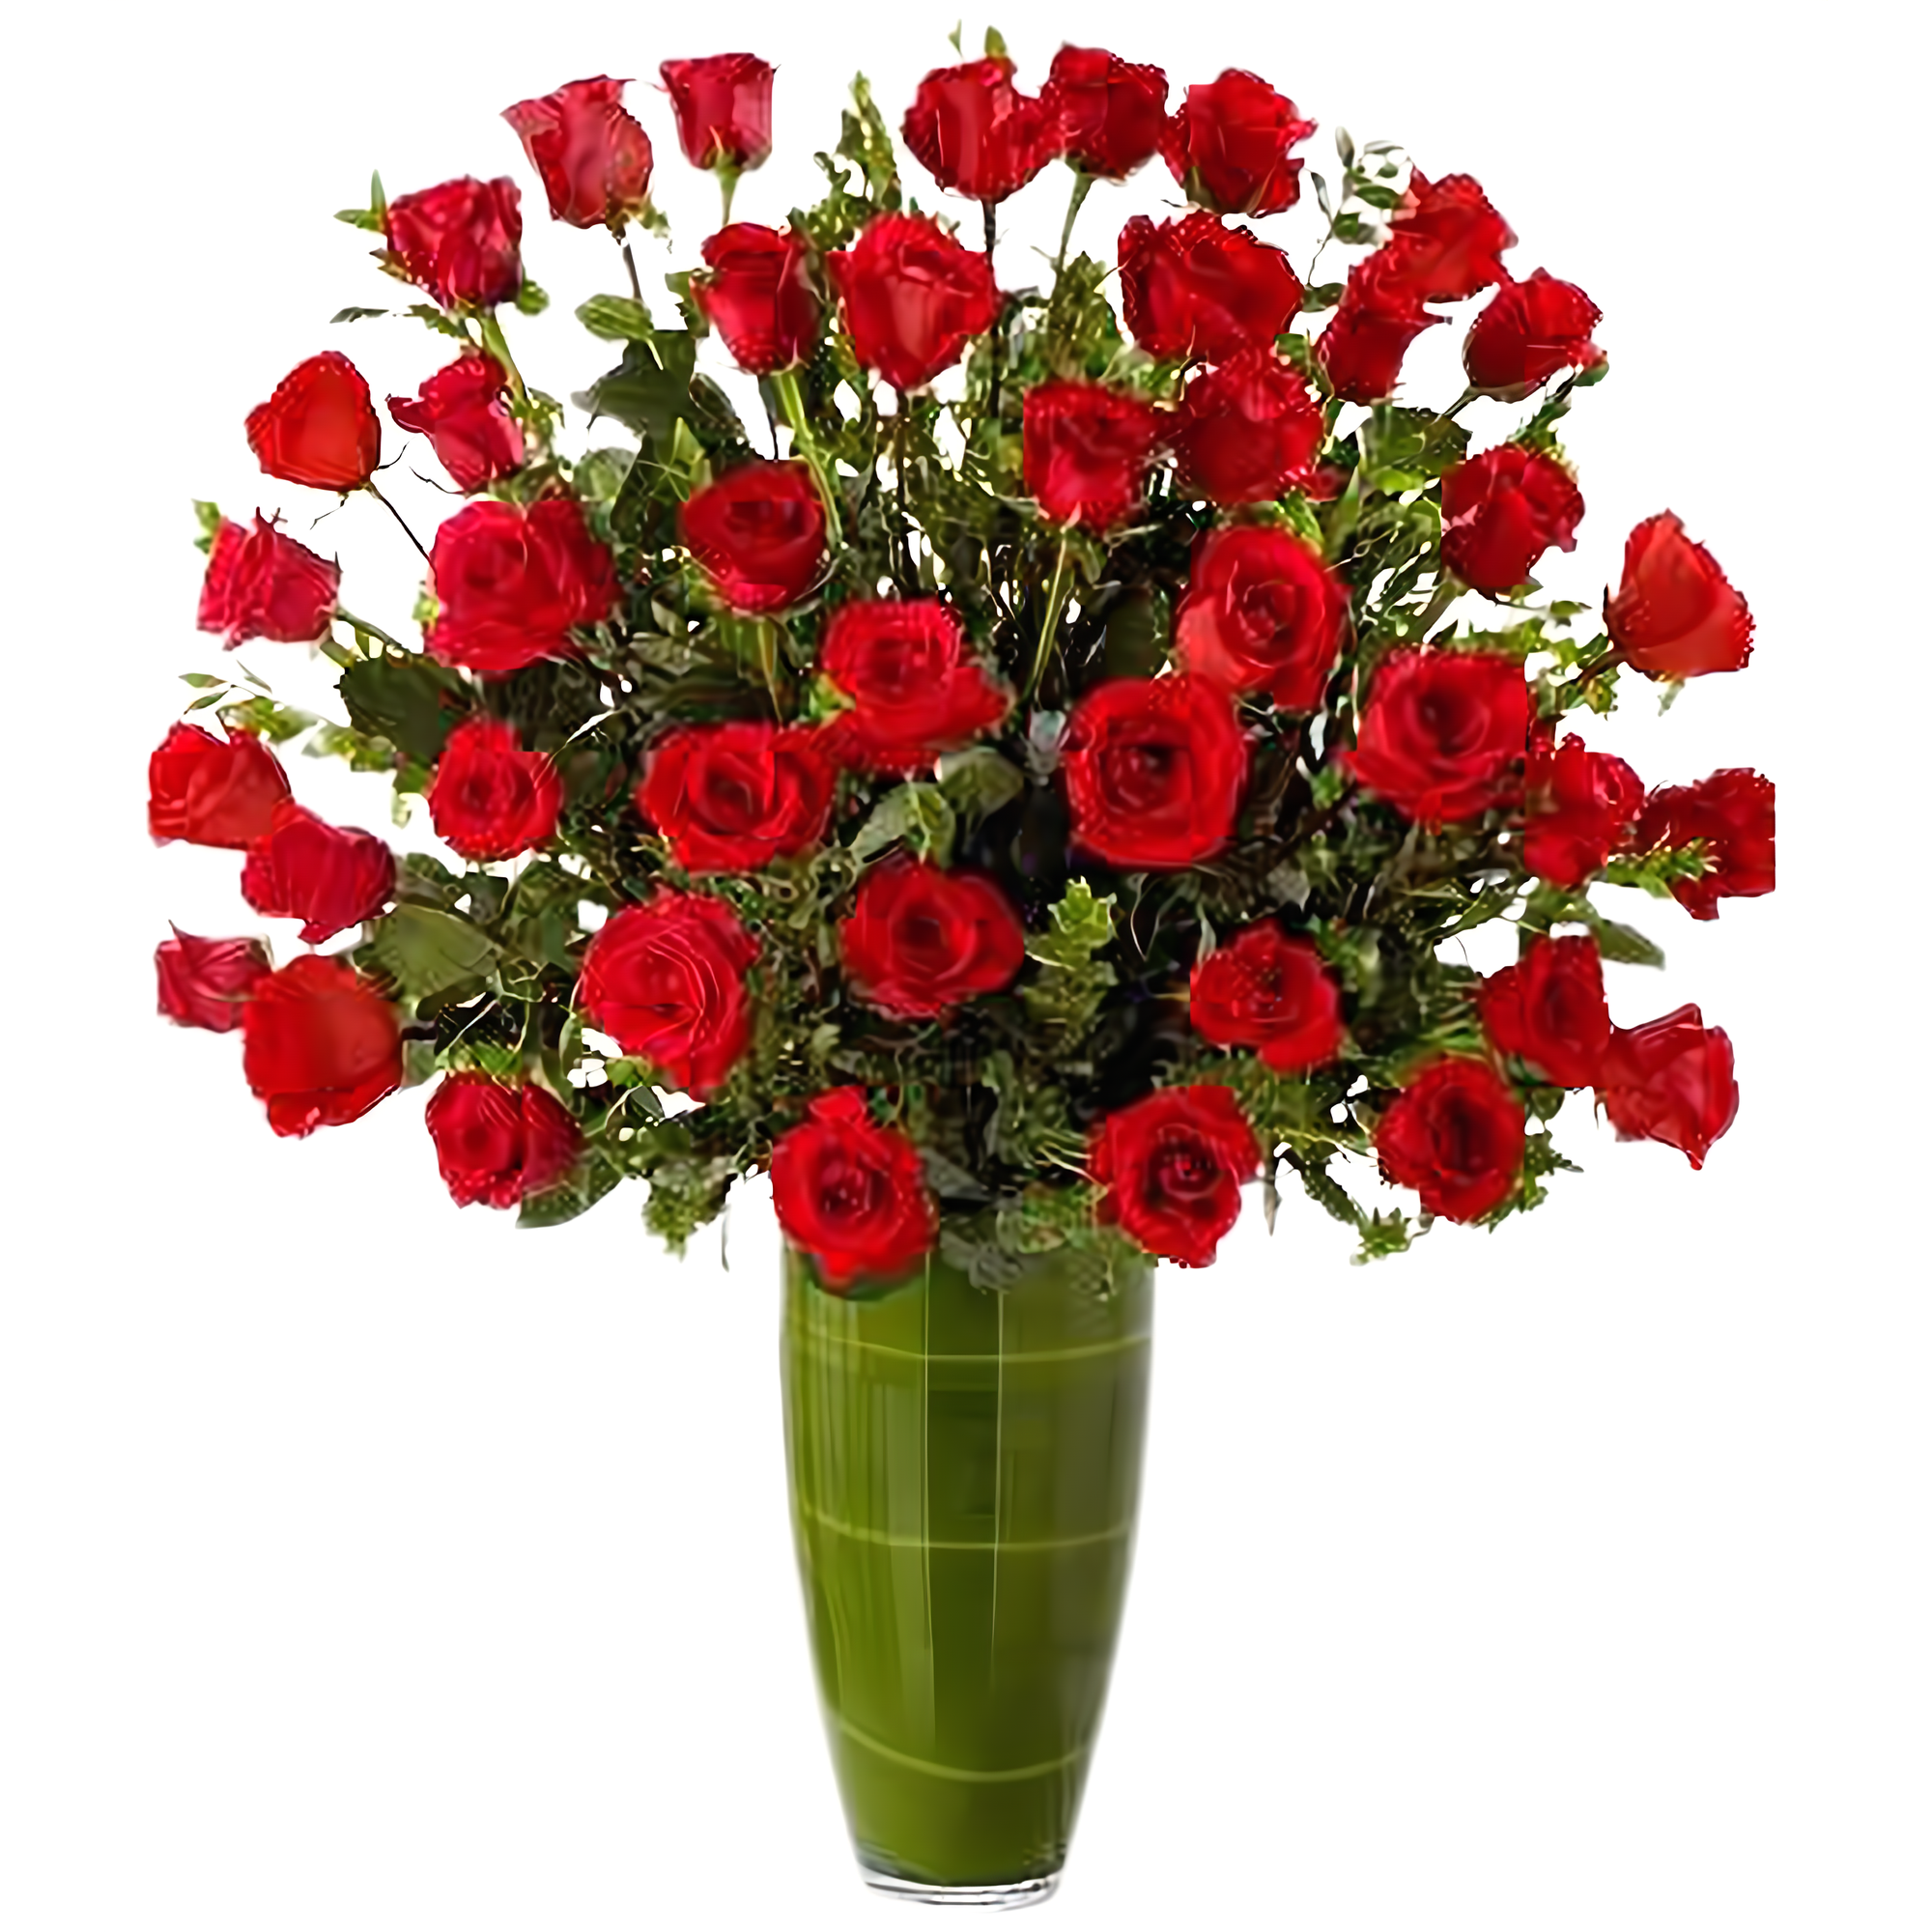 Luxury Rose Bouquet - 24 Premium Red Long-Stemmed Roses - Products > Luxury Collection